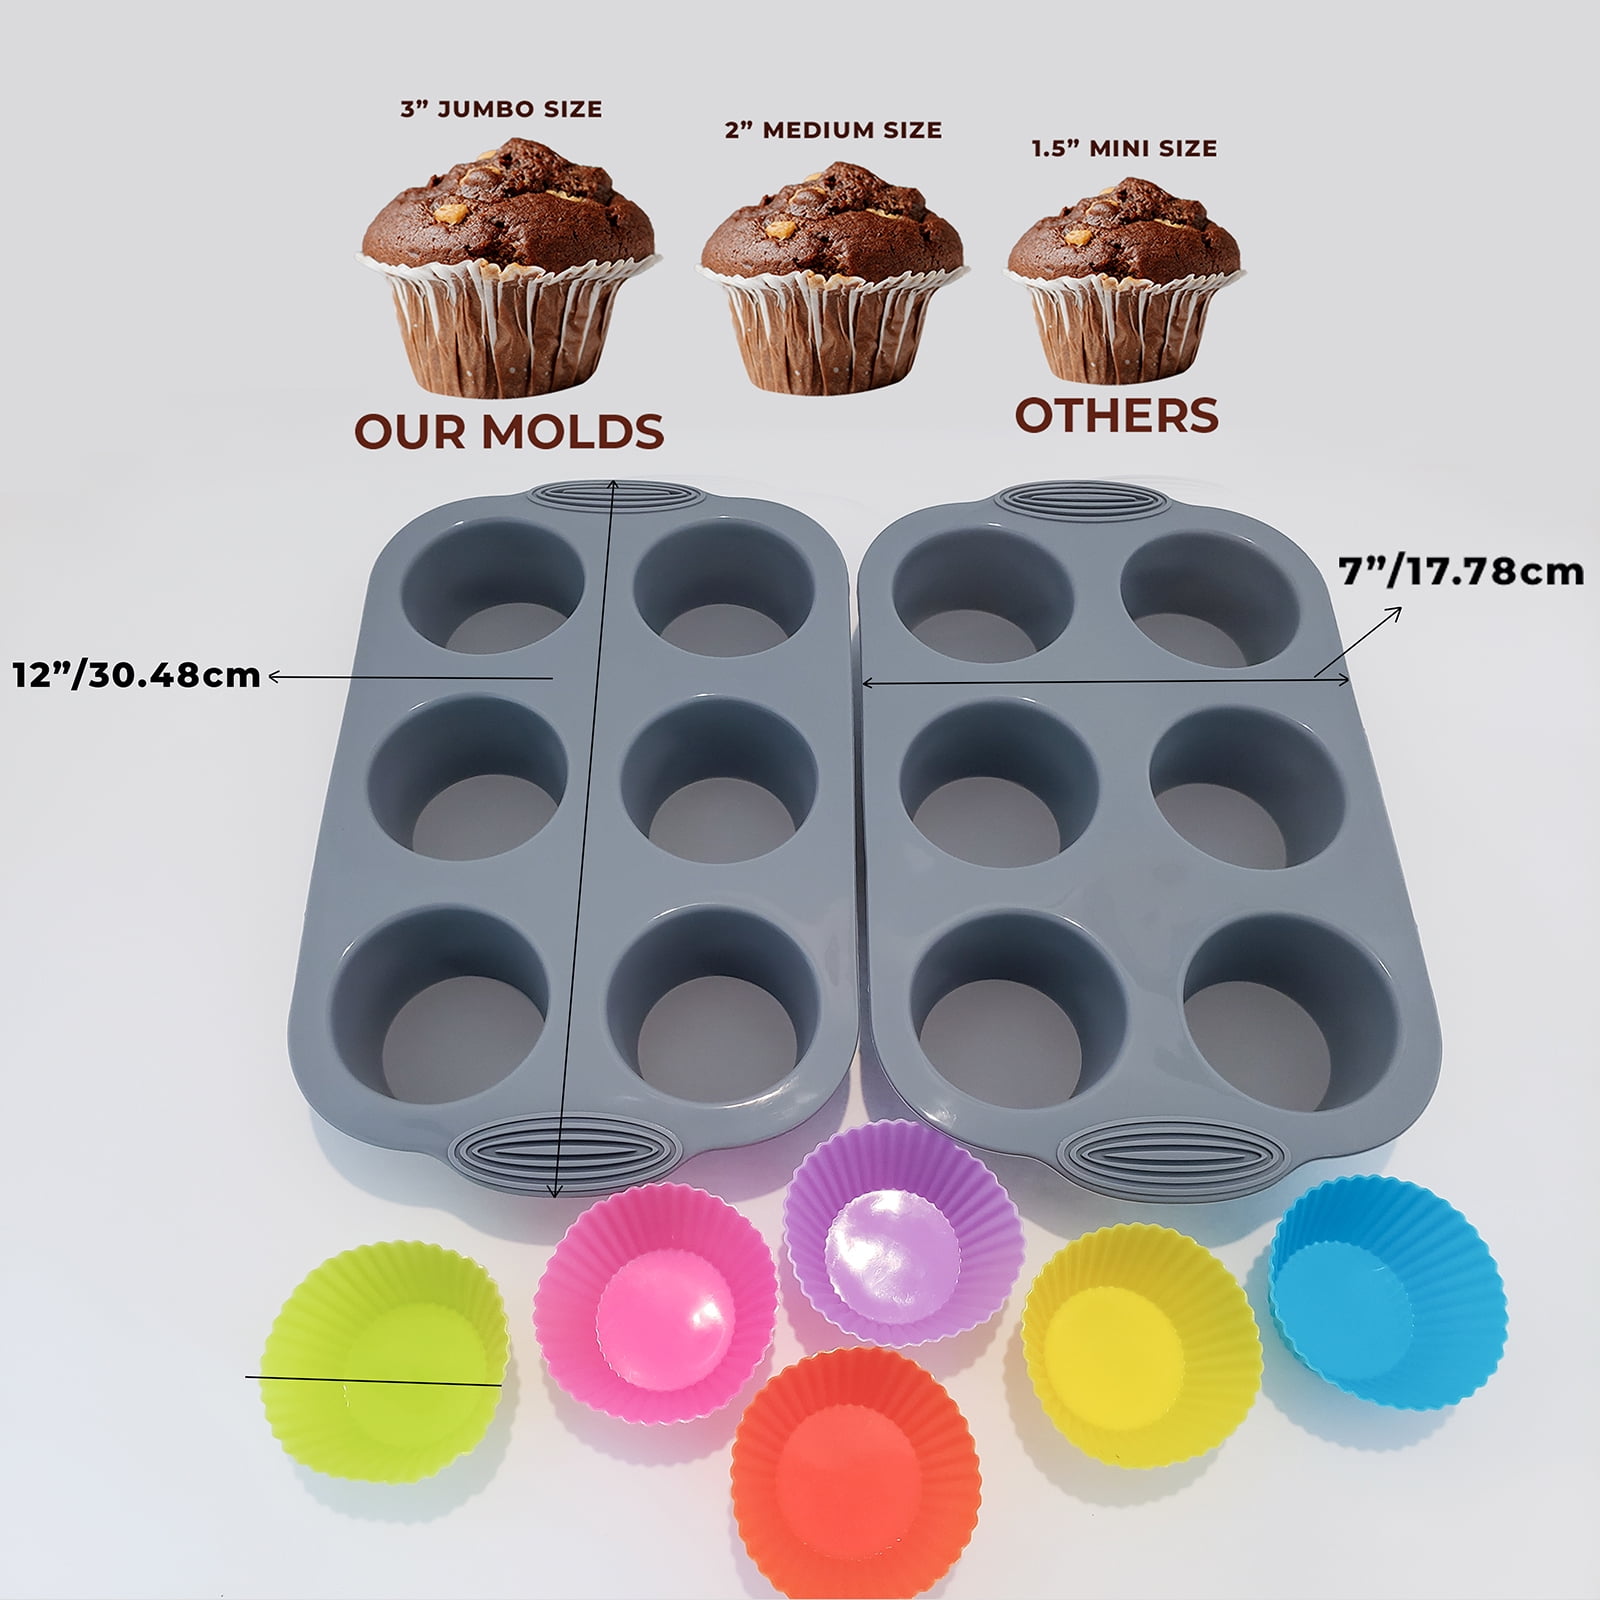 Details about   Premium Non-Stick Bakeware Muffin Top Baking Pan for Eggs Corn Bread 12 Cavitie 